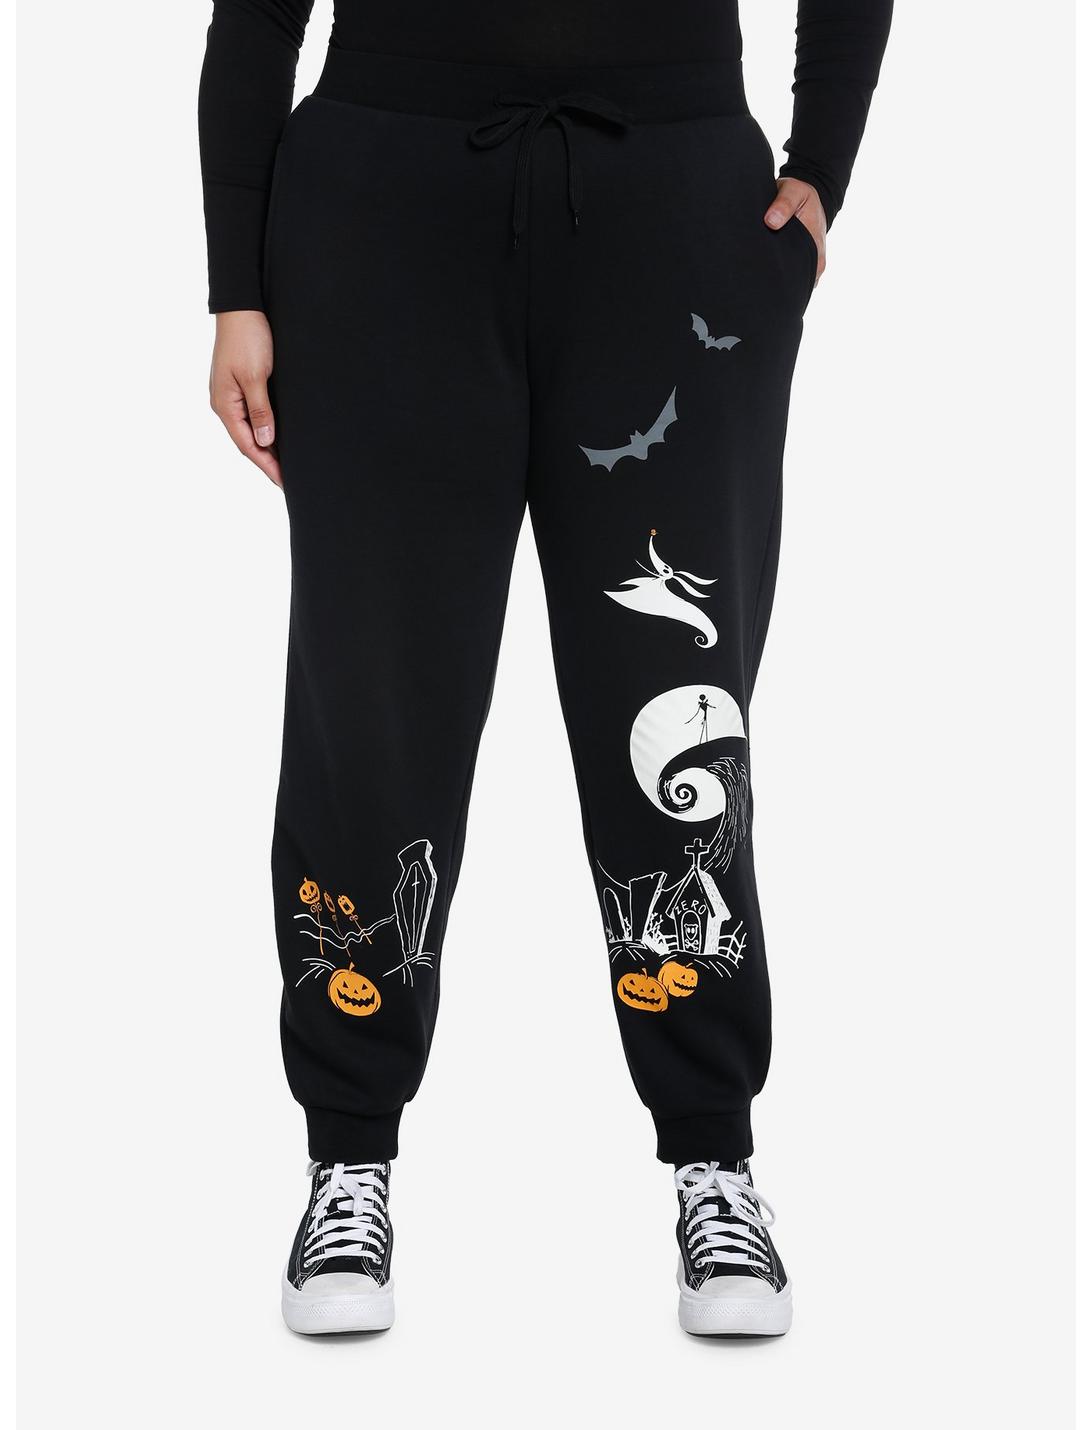 Her Universe The Nightmare Before Christmas Spiral Hill Girls Jogger Sweatpants Plus Size, ORANGE, hi-res